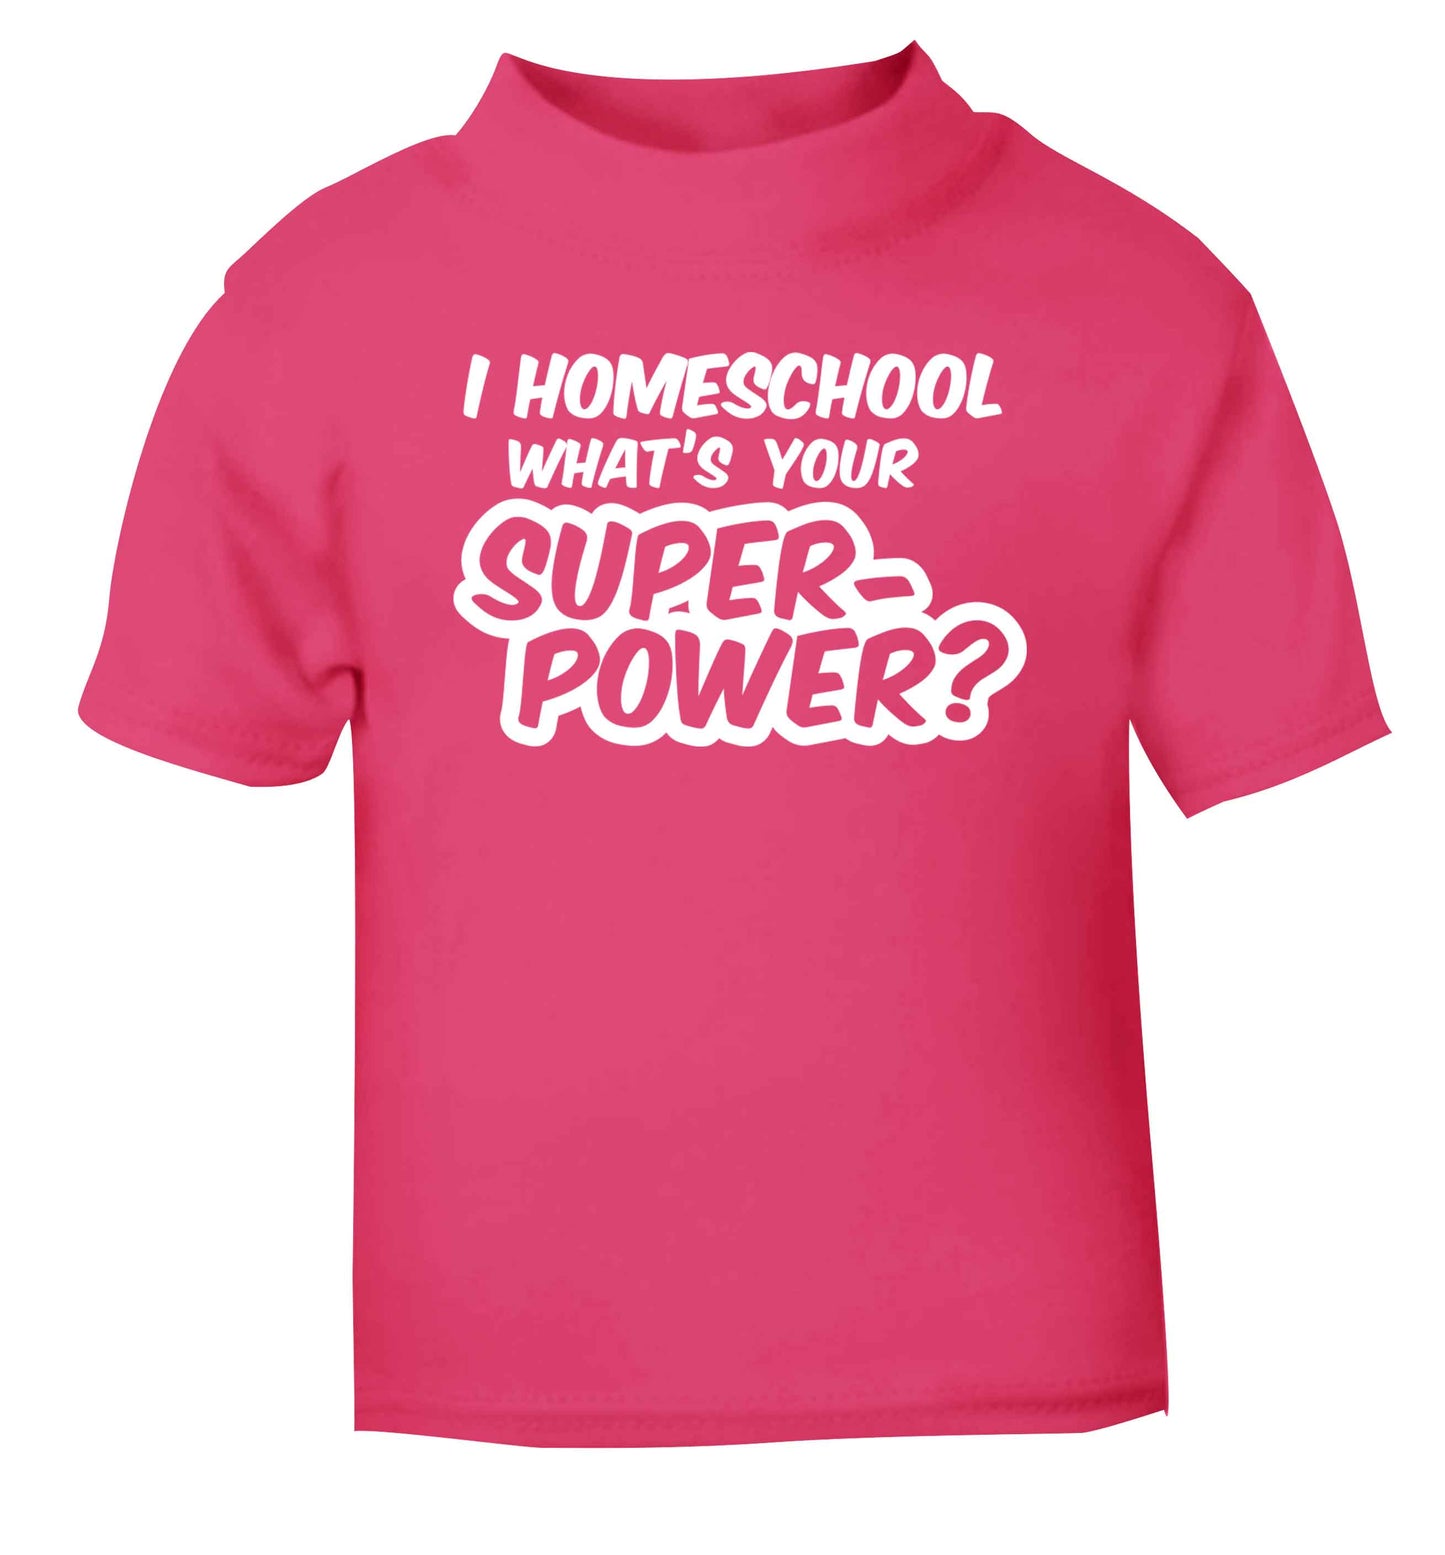 I homeschool what's your superpower? pink Baby Toddler Tshirt 2 Years